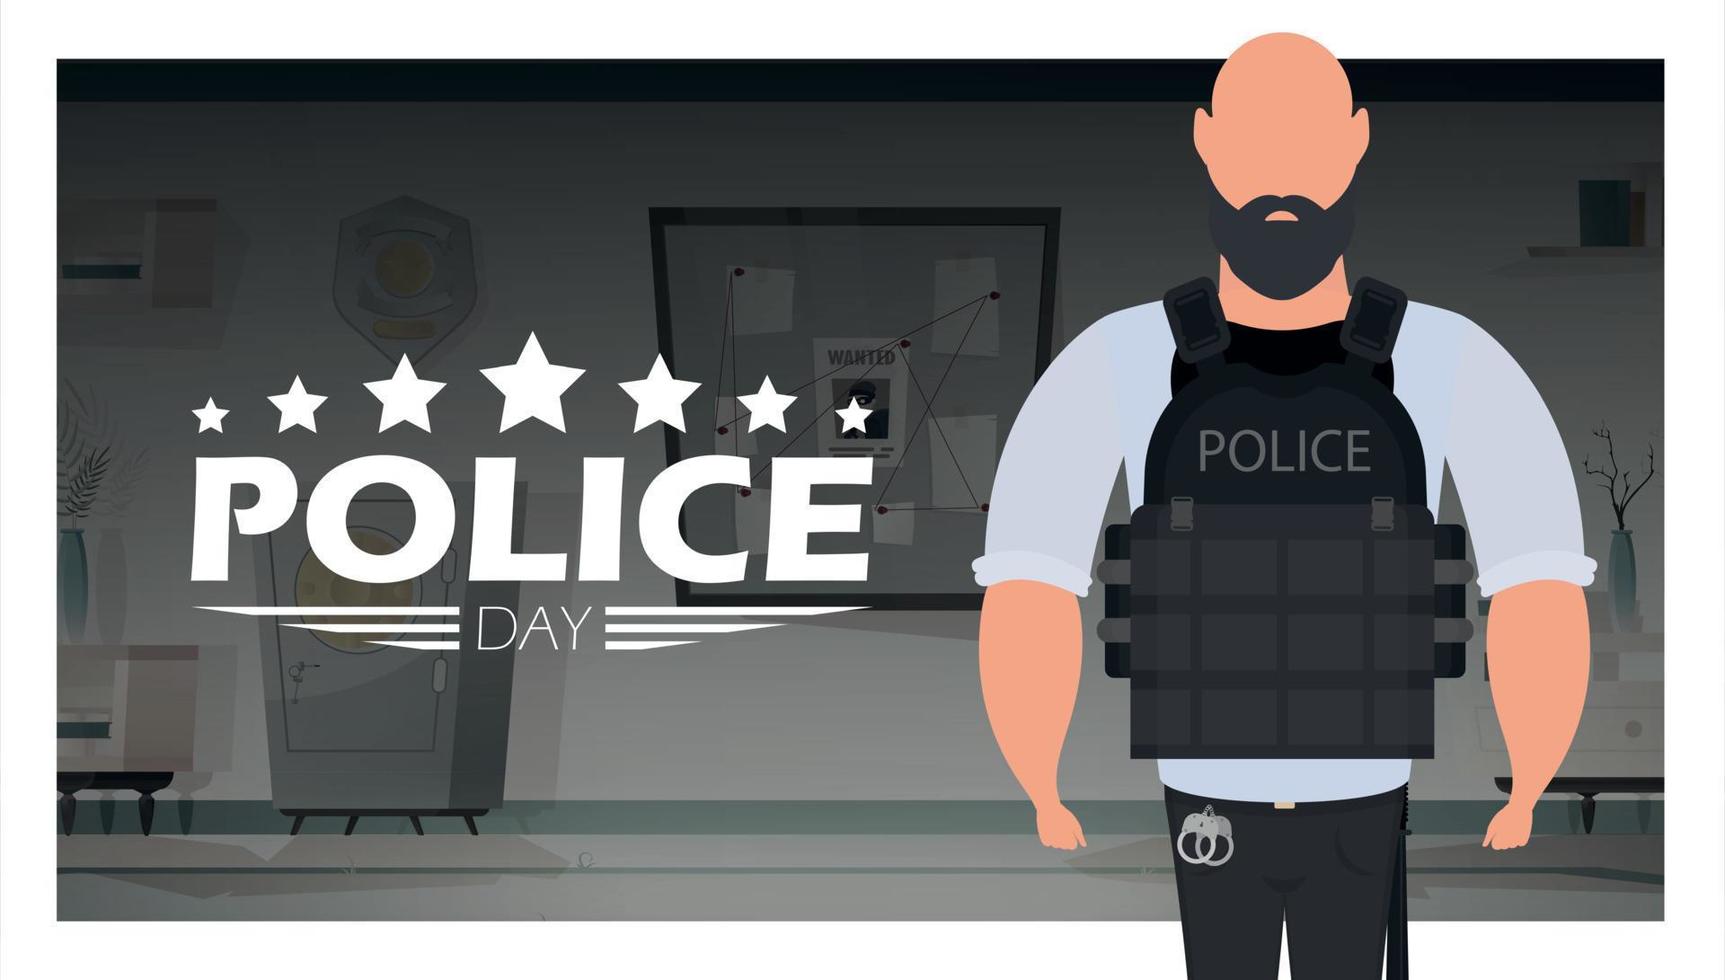 Police day poster in flat 2d style. Feast of the defenders of order. Vector illustration.